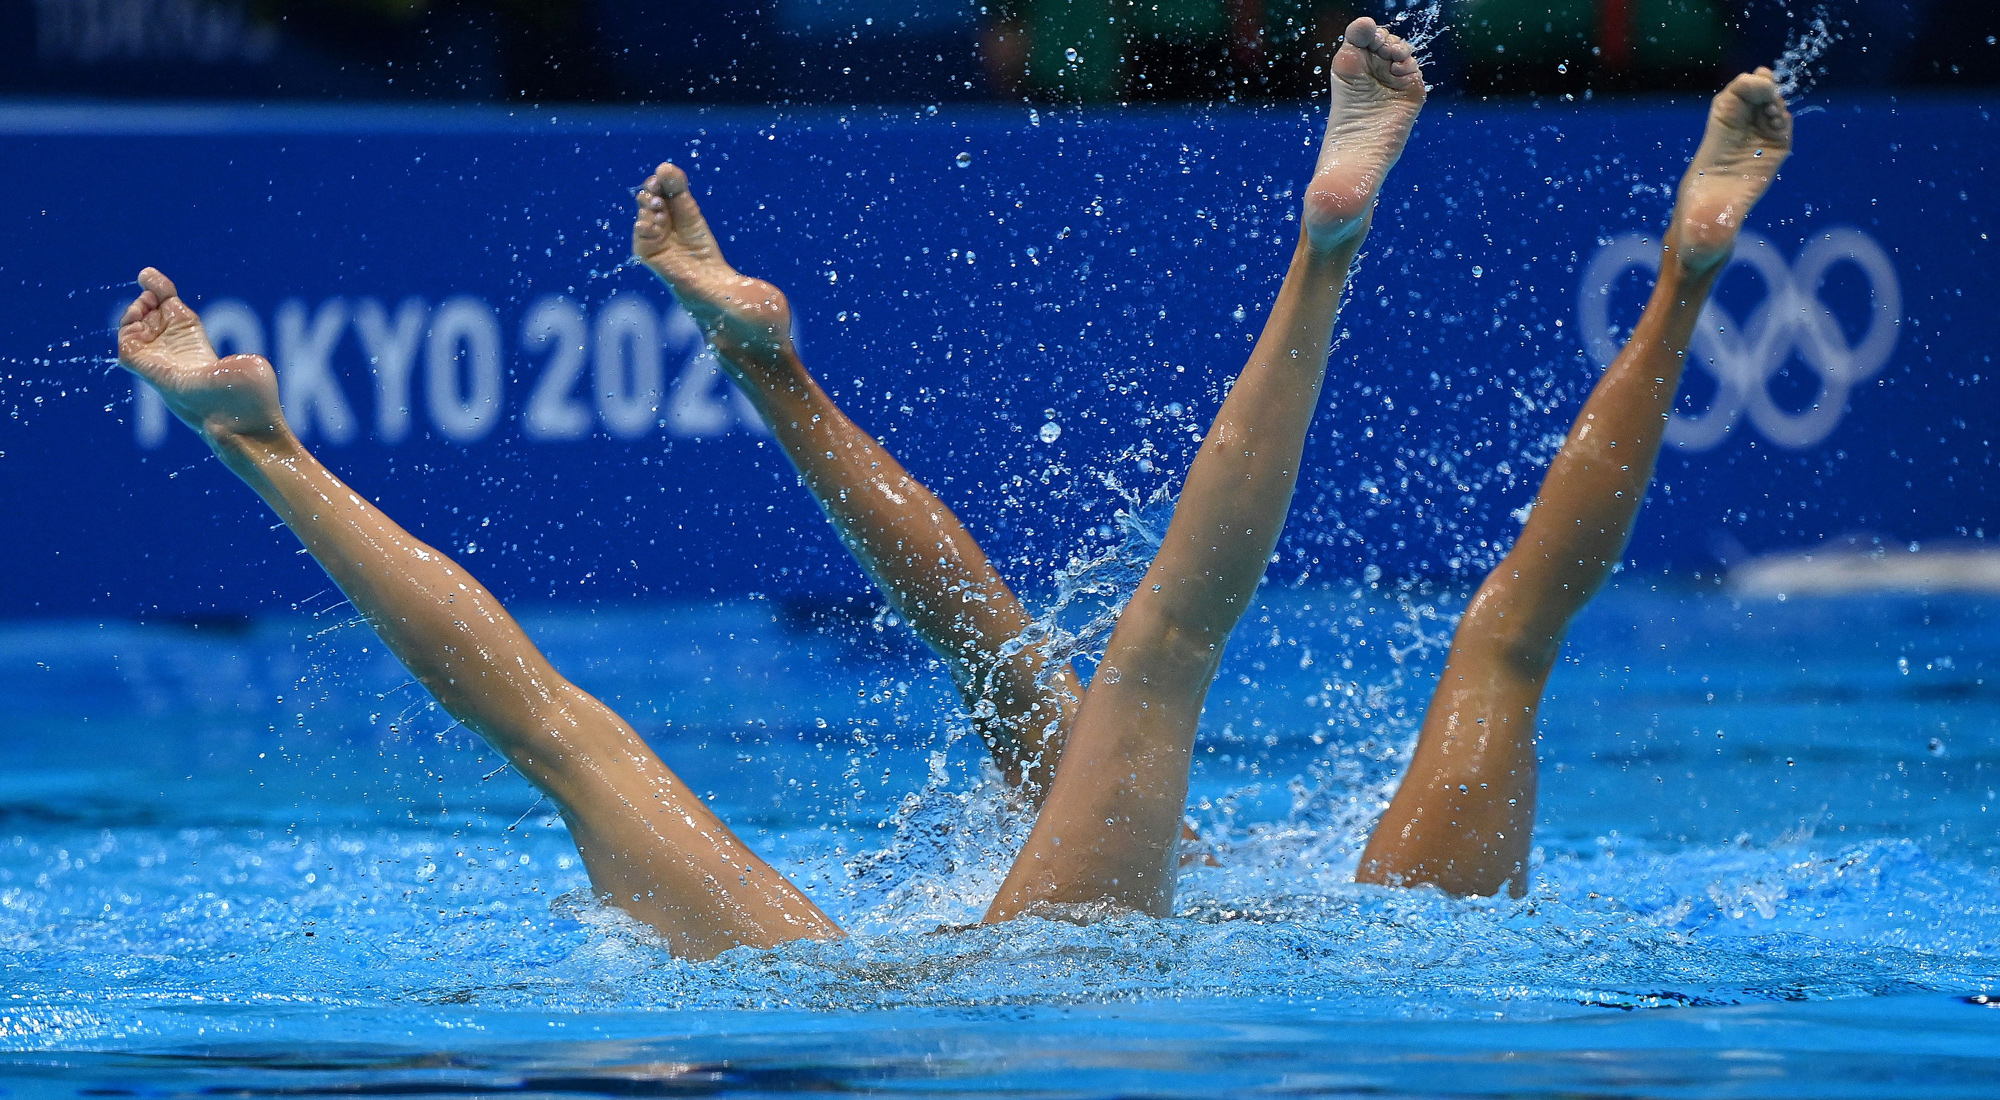 Whats in a Name? A Bit of Aquatic Confusion At the Olympics